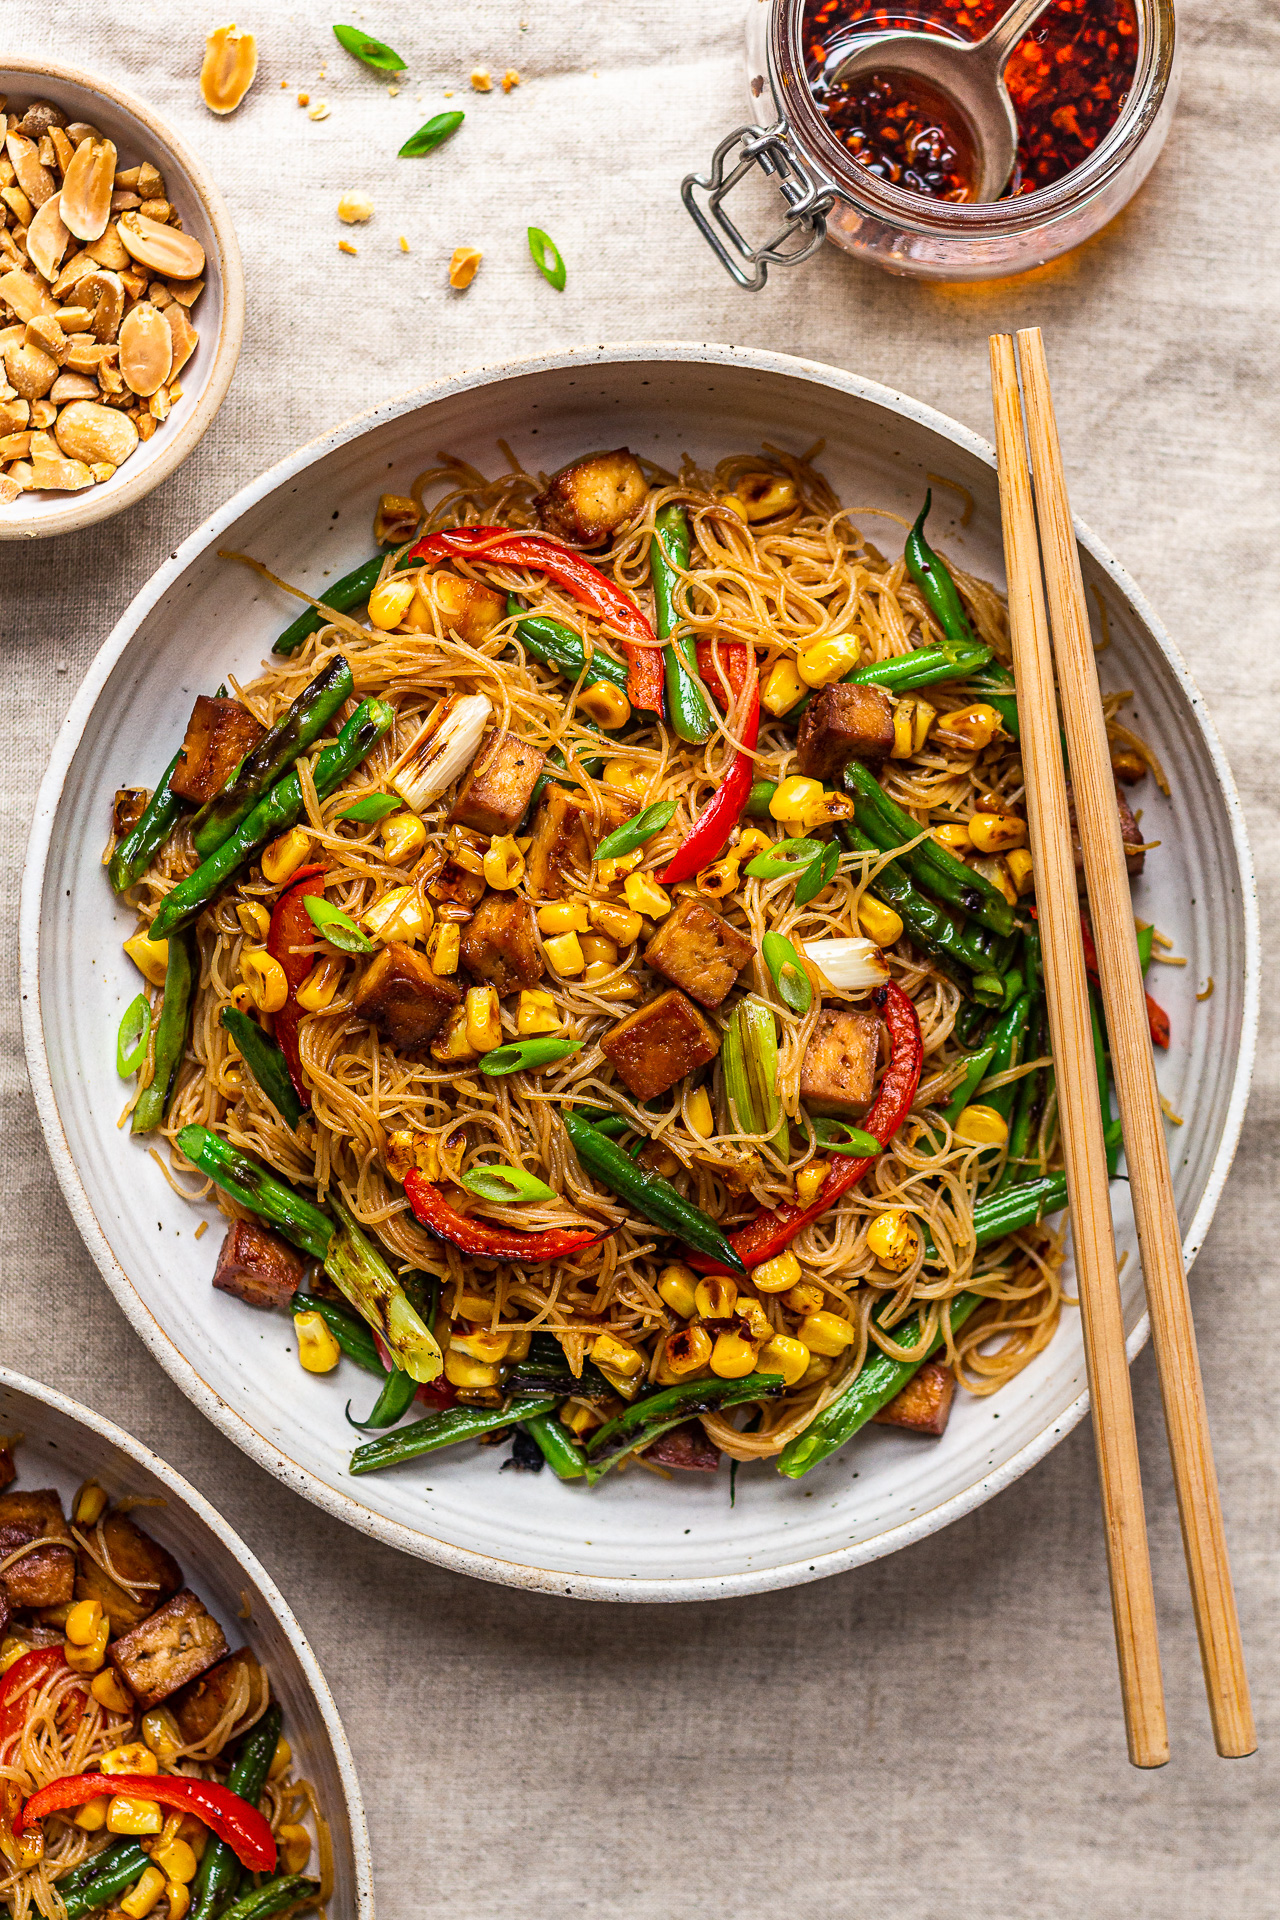 Miso Noodles with Tenderstem Broccoli - The Veg Connection